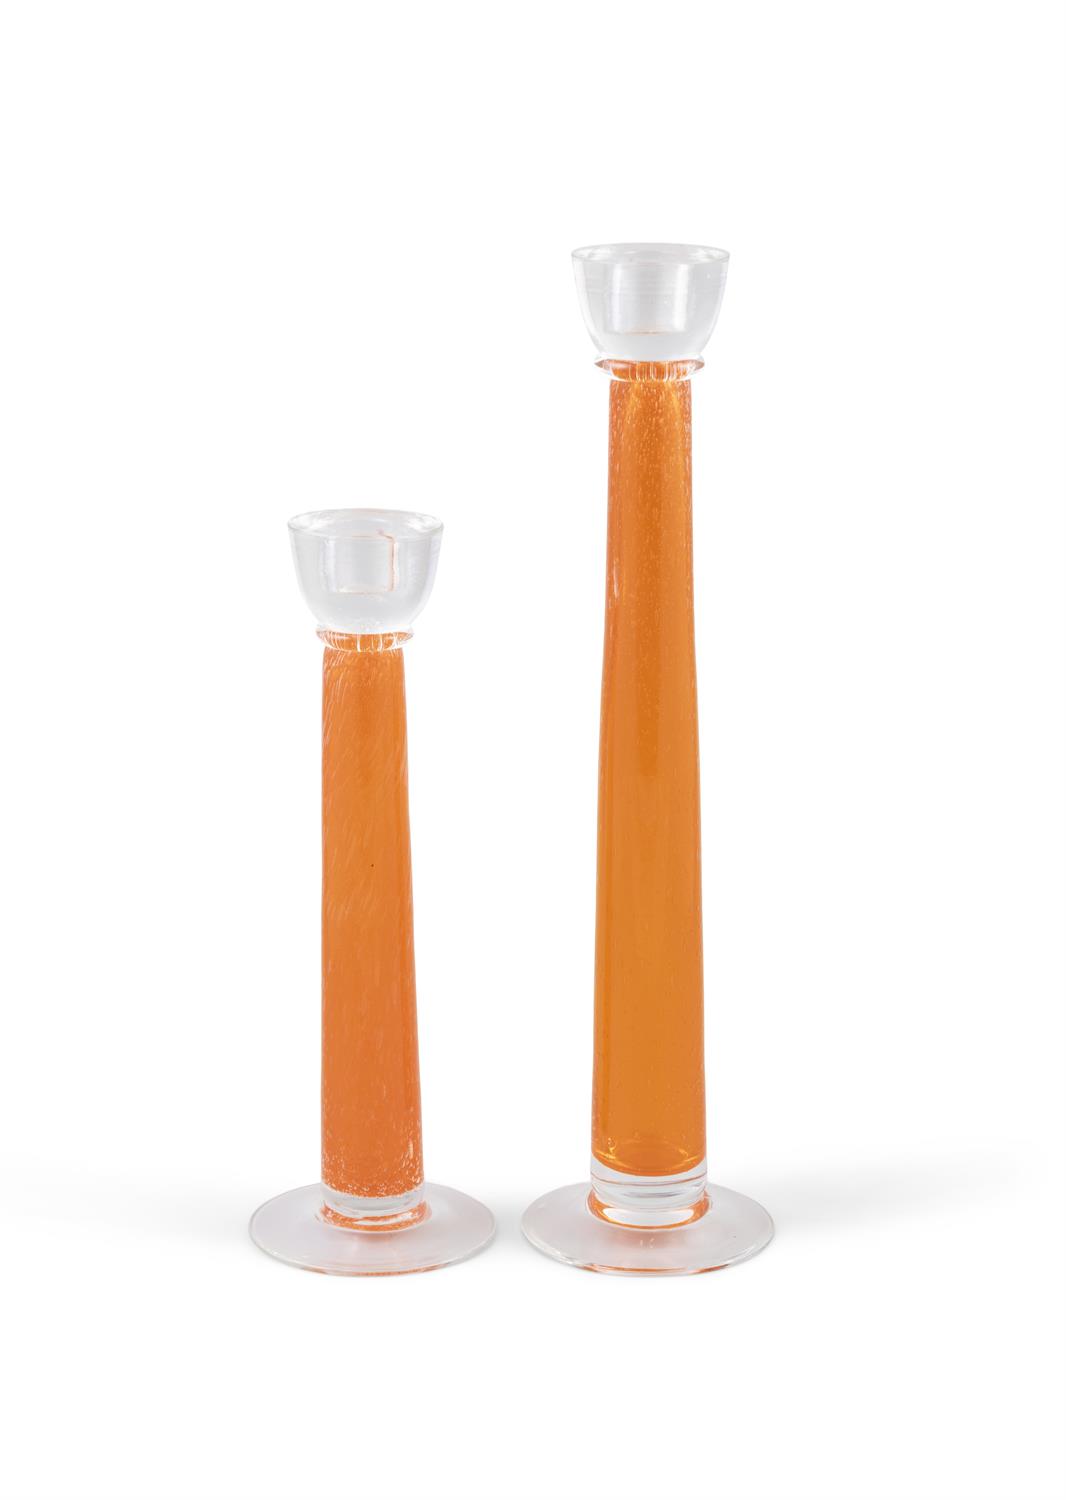 CANDLE STICKS A pair of orange and clear glass candle sticks of differing heights. Italy. 39.